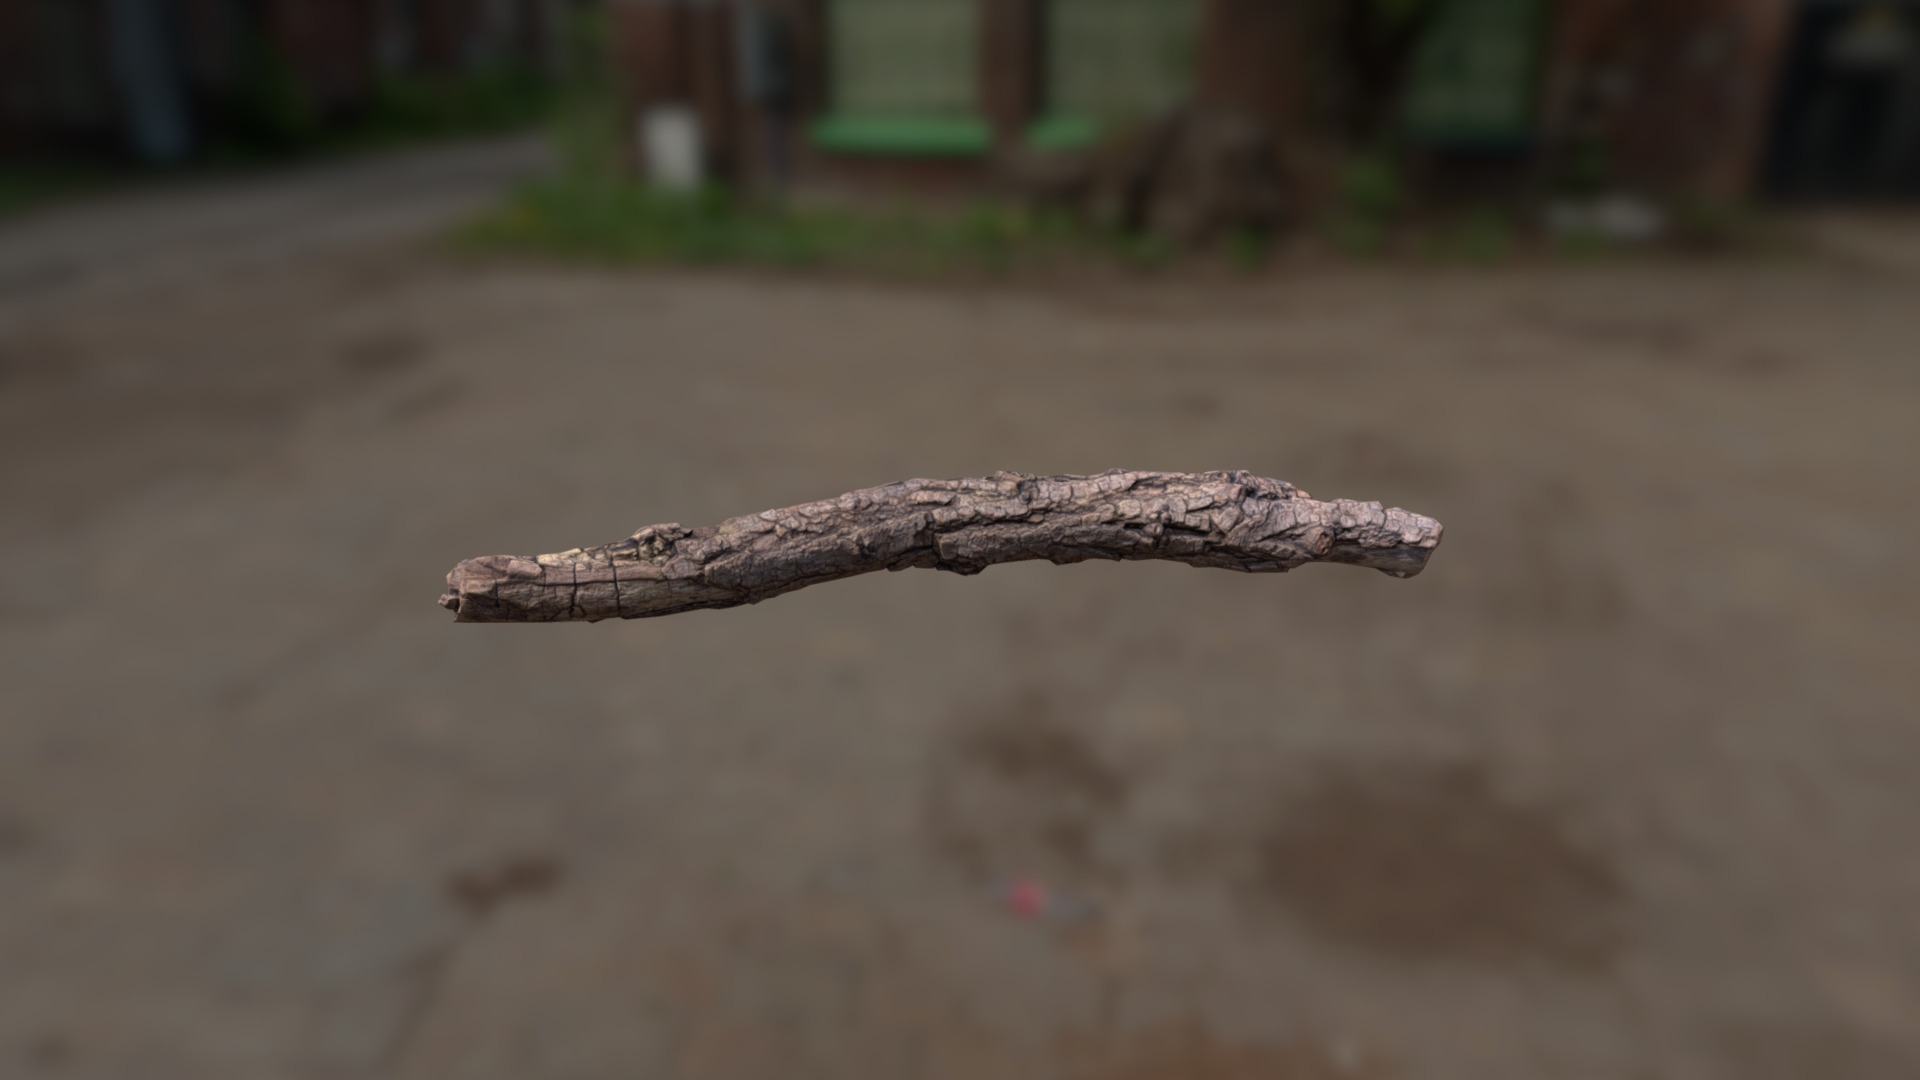 3D model Branch4 Lowpoly - This is a 3D model of the Branch4 Lowpoly. The 3D model is about a snake on a concrete surface.